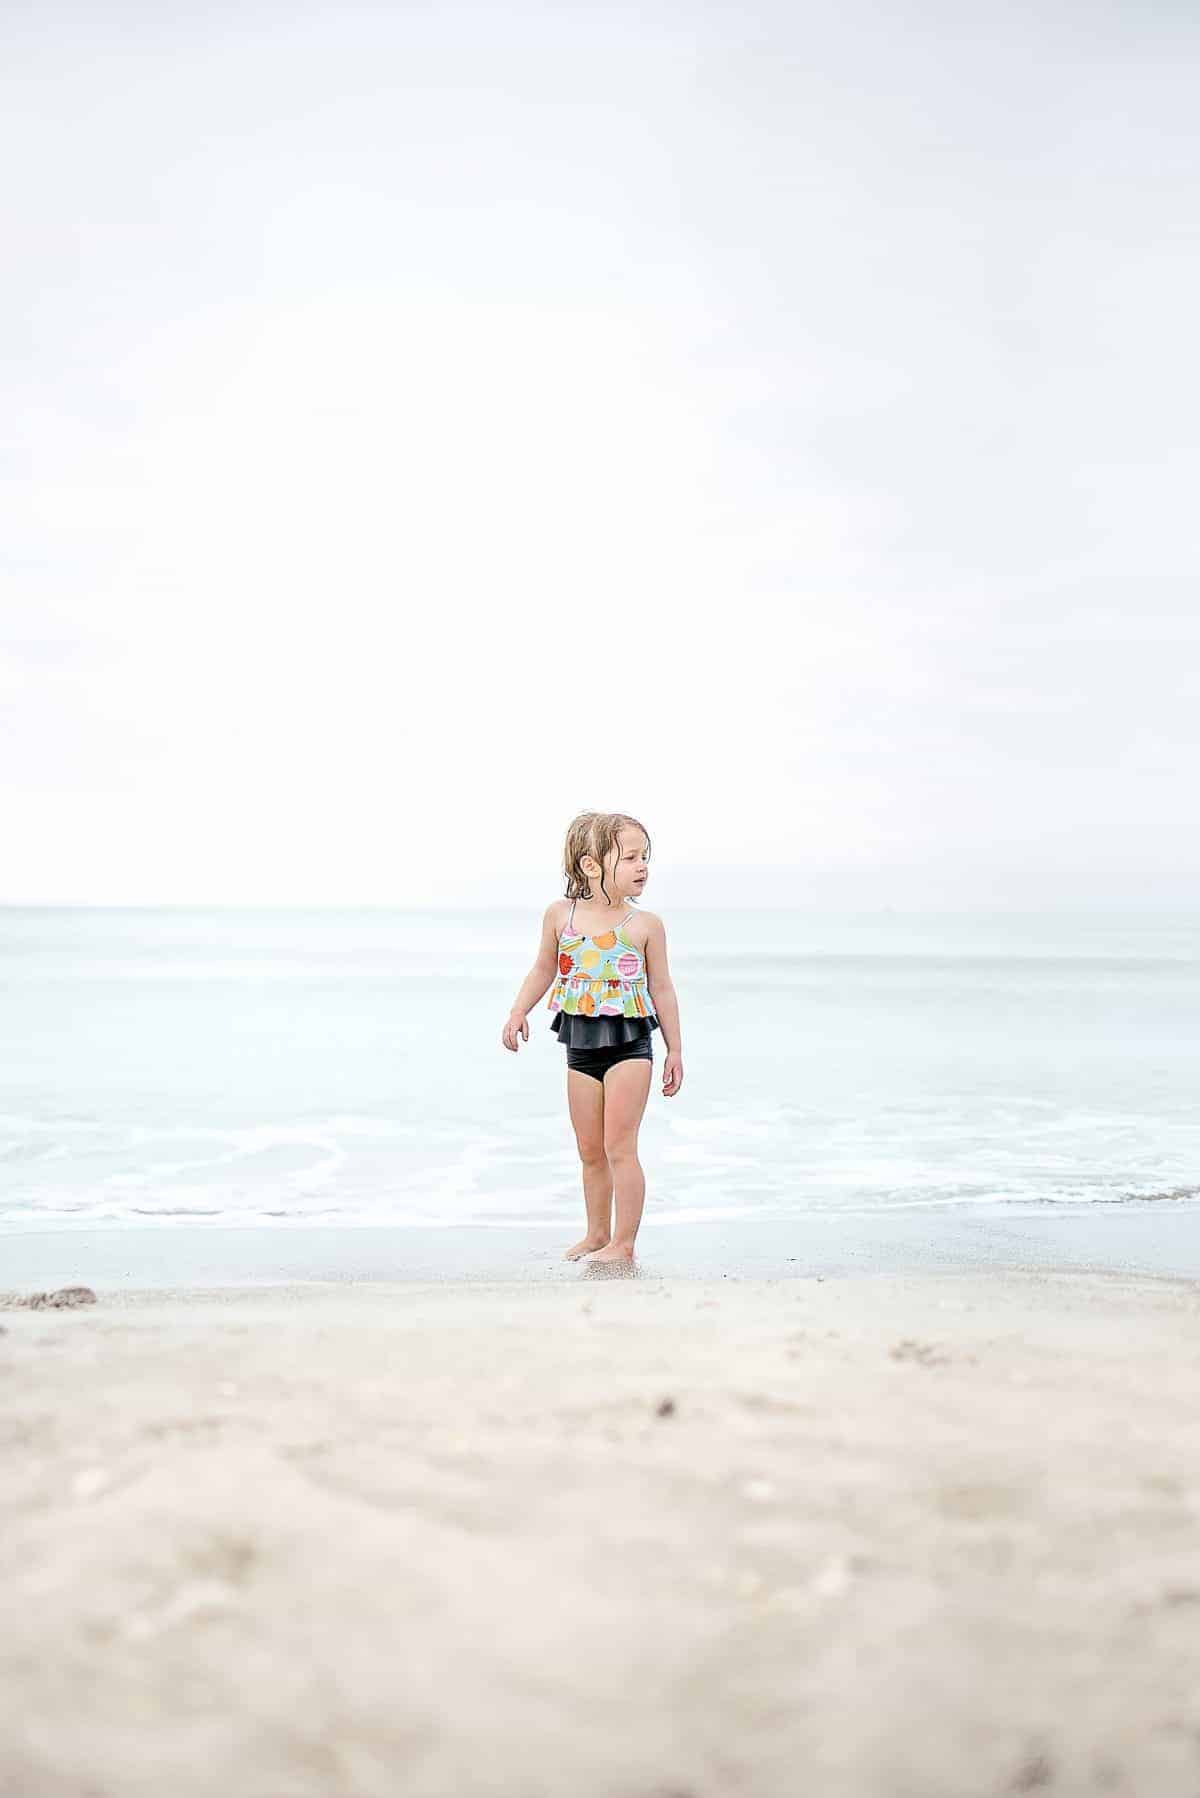 10 tips for taking amazing beach photos of your kids